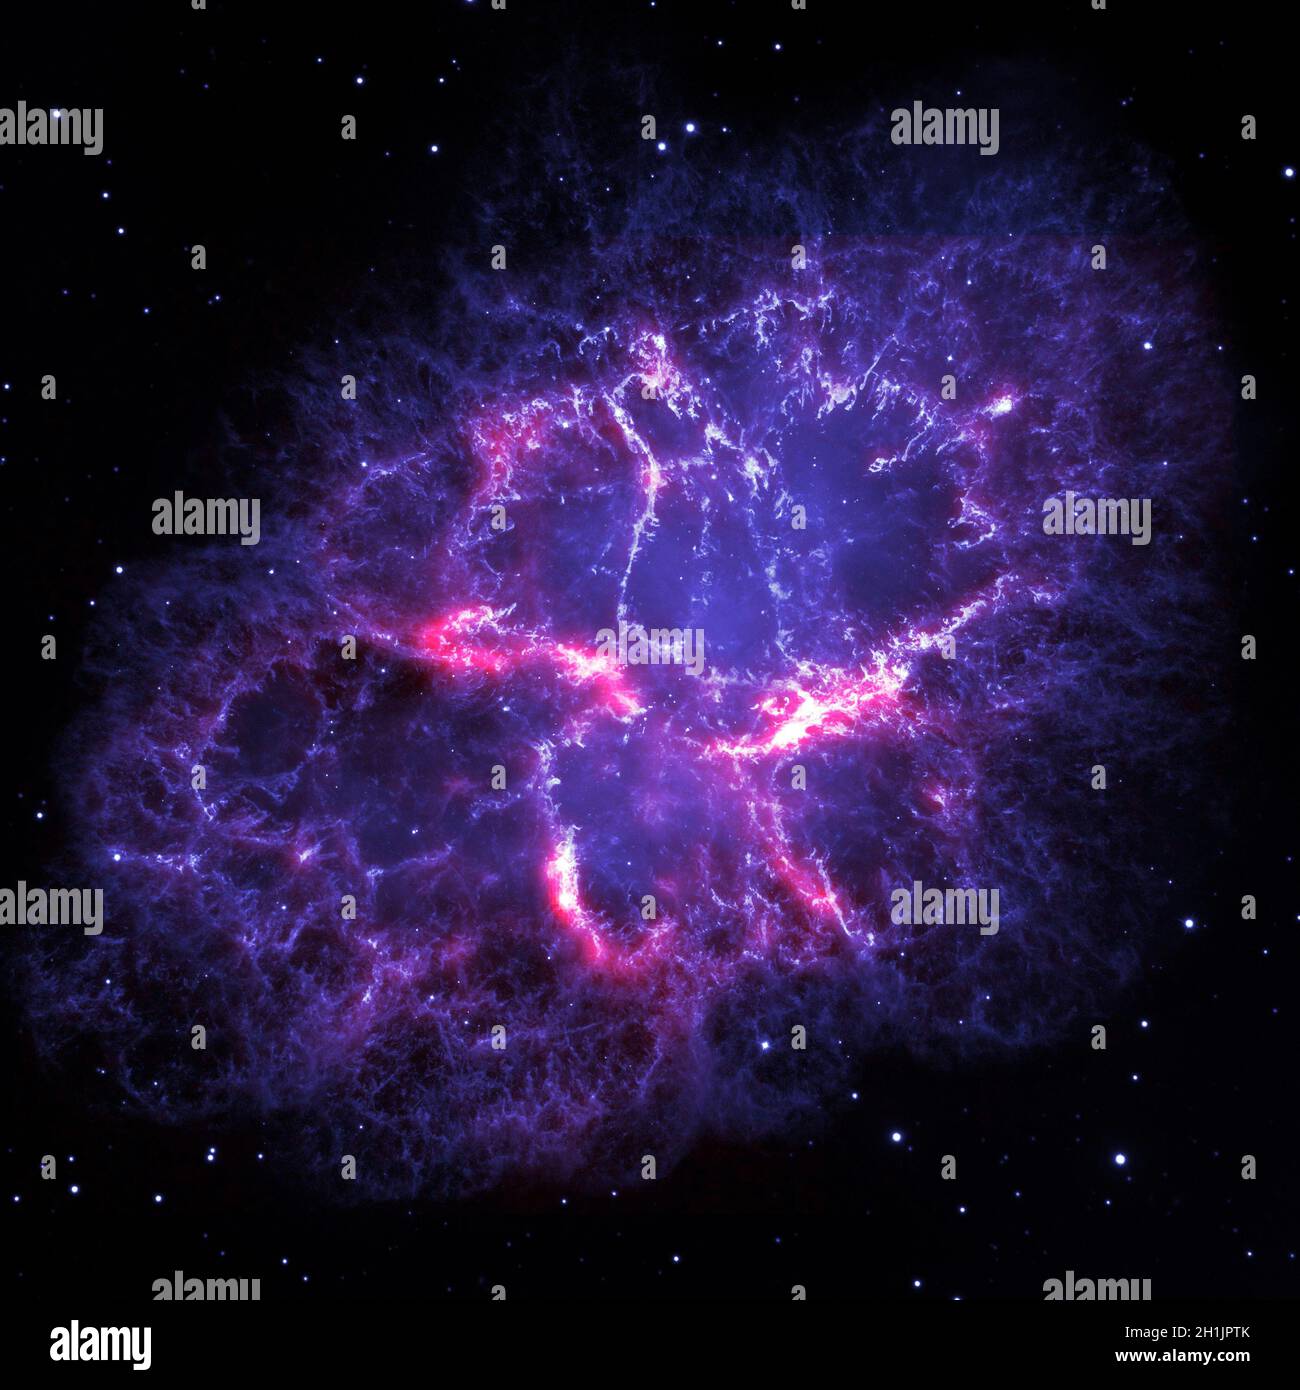 This image shows a composite view of the Crab nebula, an iconic supernova remnant in our Milky Way galaxy, as viewed by the Herschel Space Observatory and the Hubble Space Telescope. A wispy and filamentary cloud of gas and dust, the Crab nebula is the remnant of a supernova explosion that was observed by Chinese astronomers in the year 1054.   An optimised and digitally enhanced version of a NASA/ ESA image. Credit: NASA/ESA Stock Photo